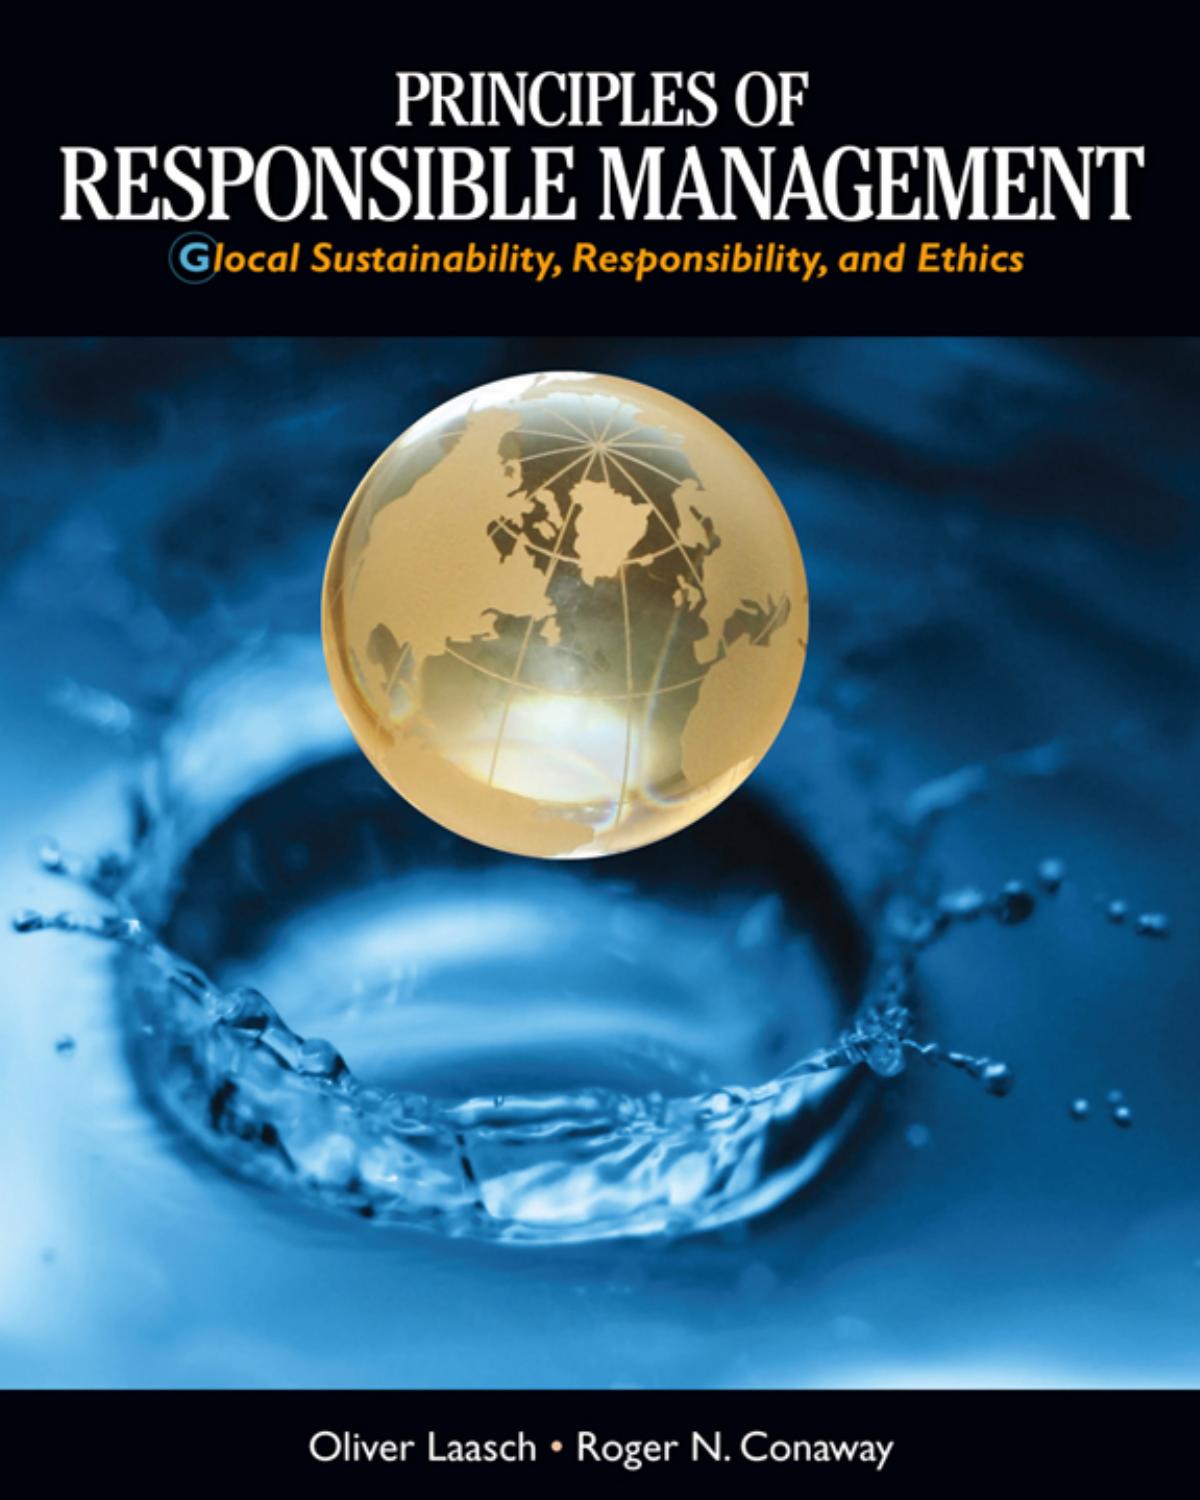 Principles of Responsible Management Glocal Sustainability, Responsibility, and Ethics.jpg